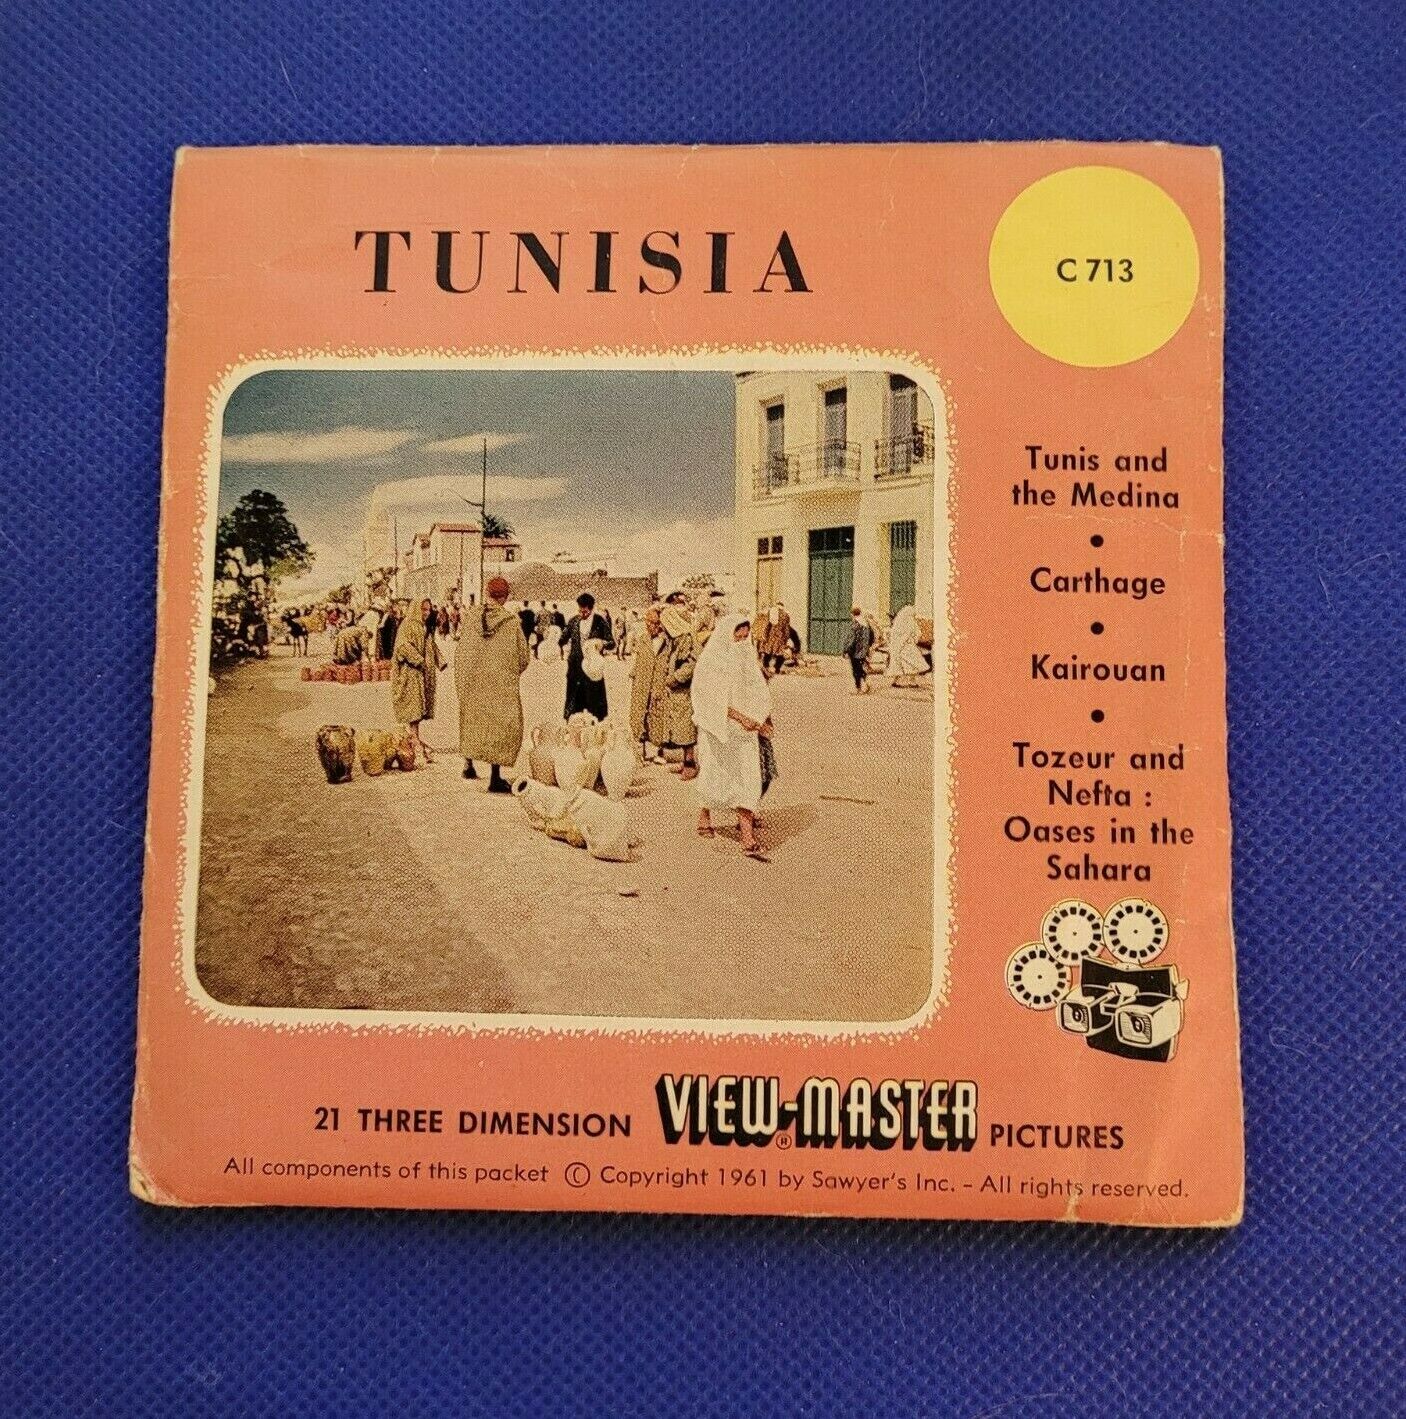 Rare Sawyer's Vintage C713 Tunisia North Africa view-master 3 Reels Packet Reel